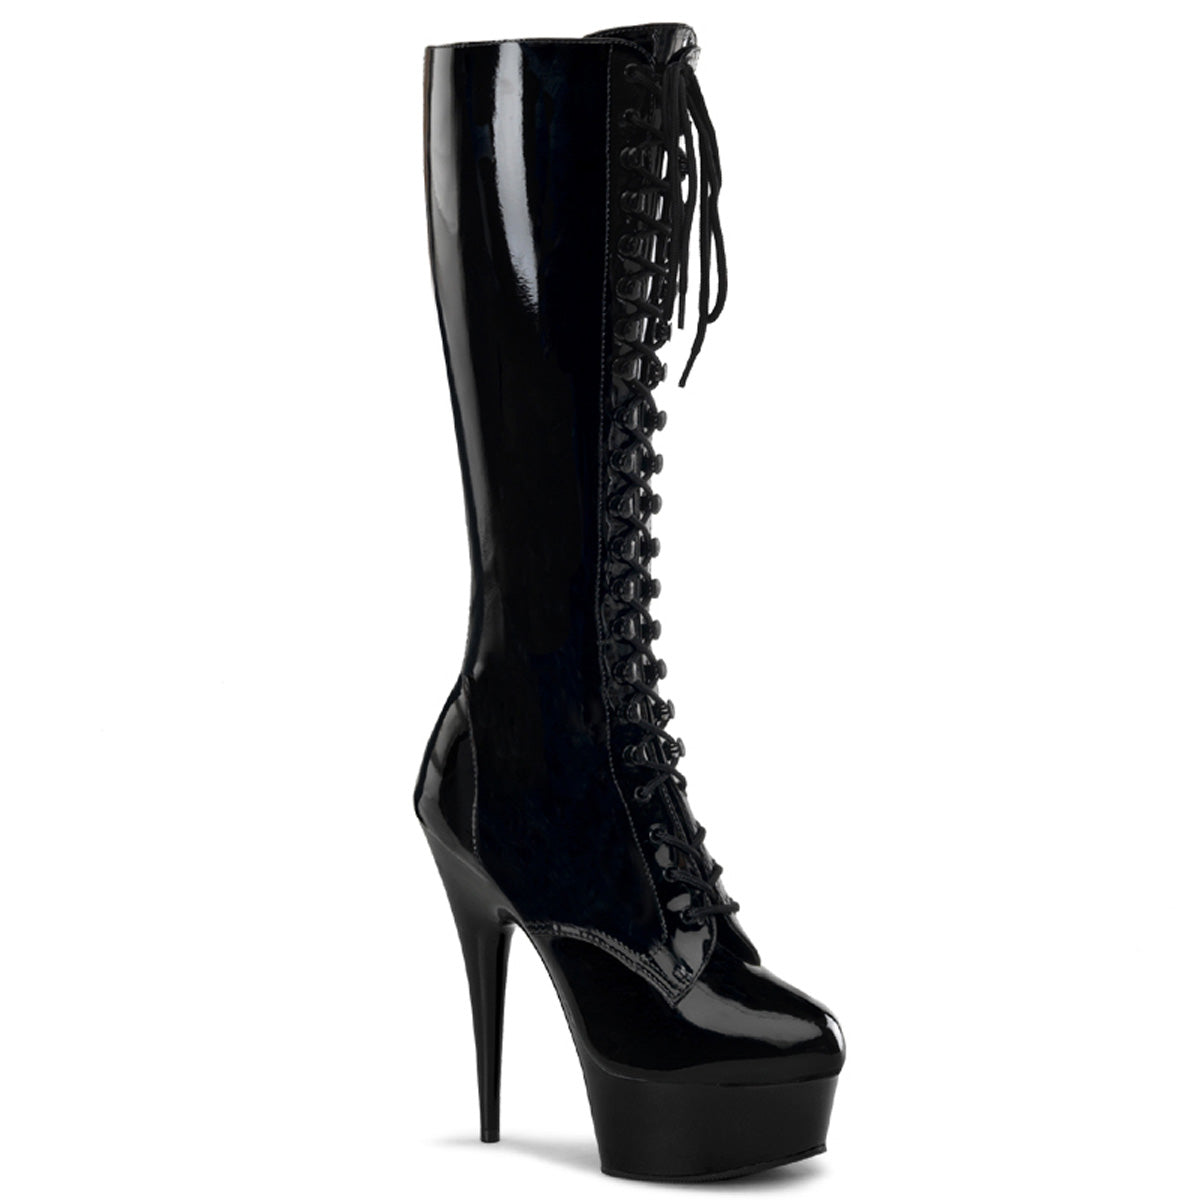 DELIGHT-2023 6" Heel Black Stretch Patent Pole Dancer Boots-Pleaser- Sexy Shoes